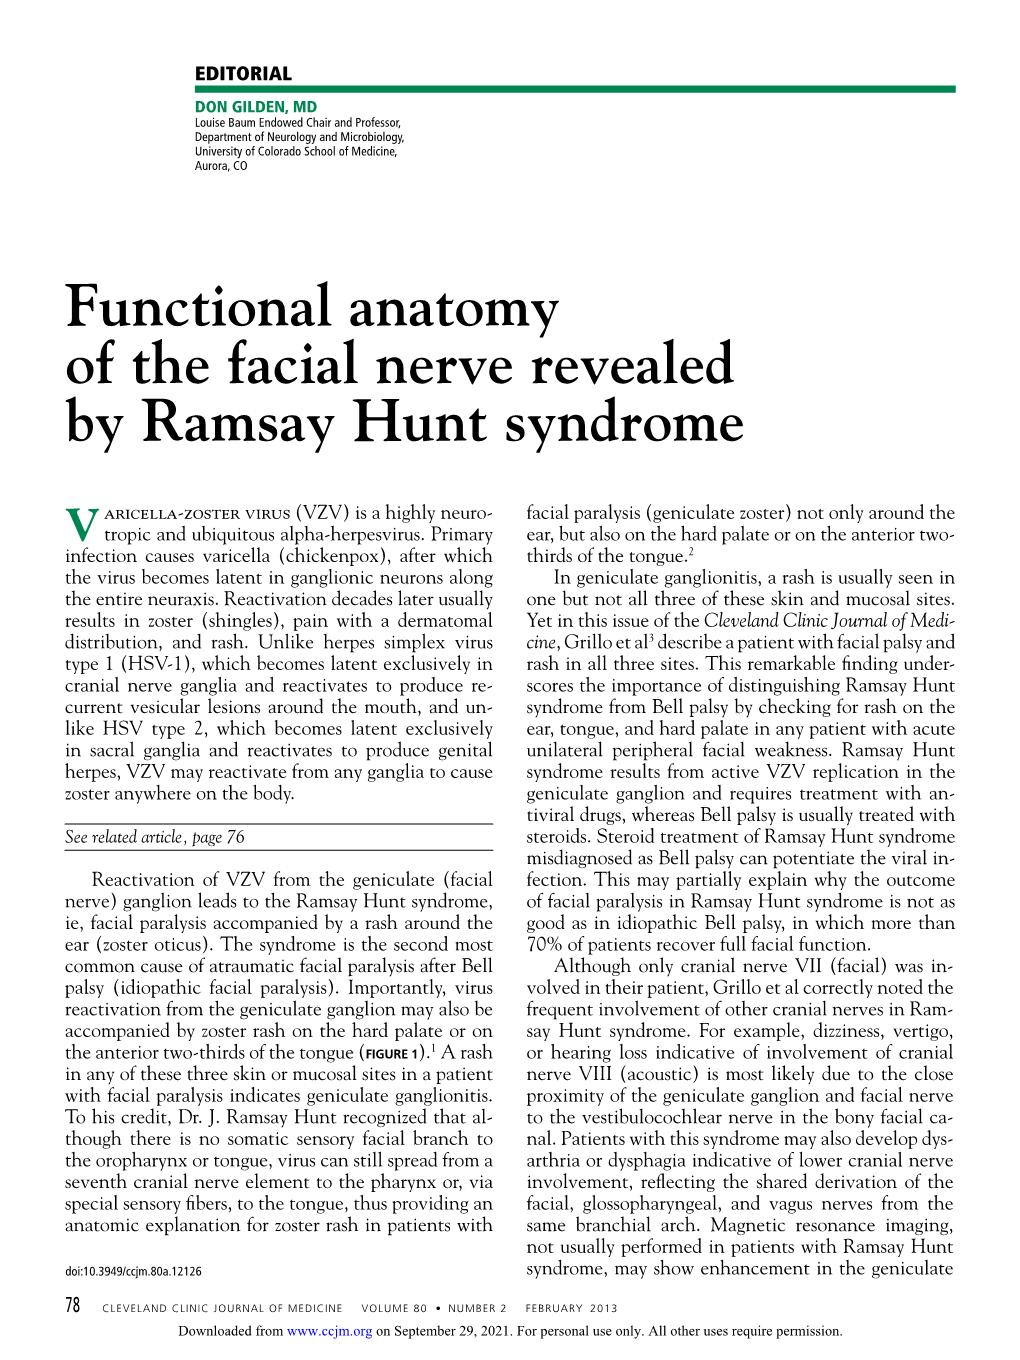 Functional Anatomy of the Facial Nerve Revealed by Ramsay Hunt Syndrome